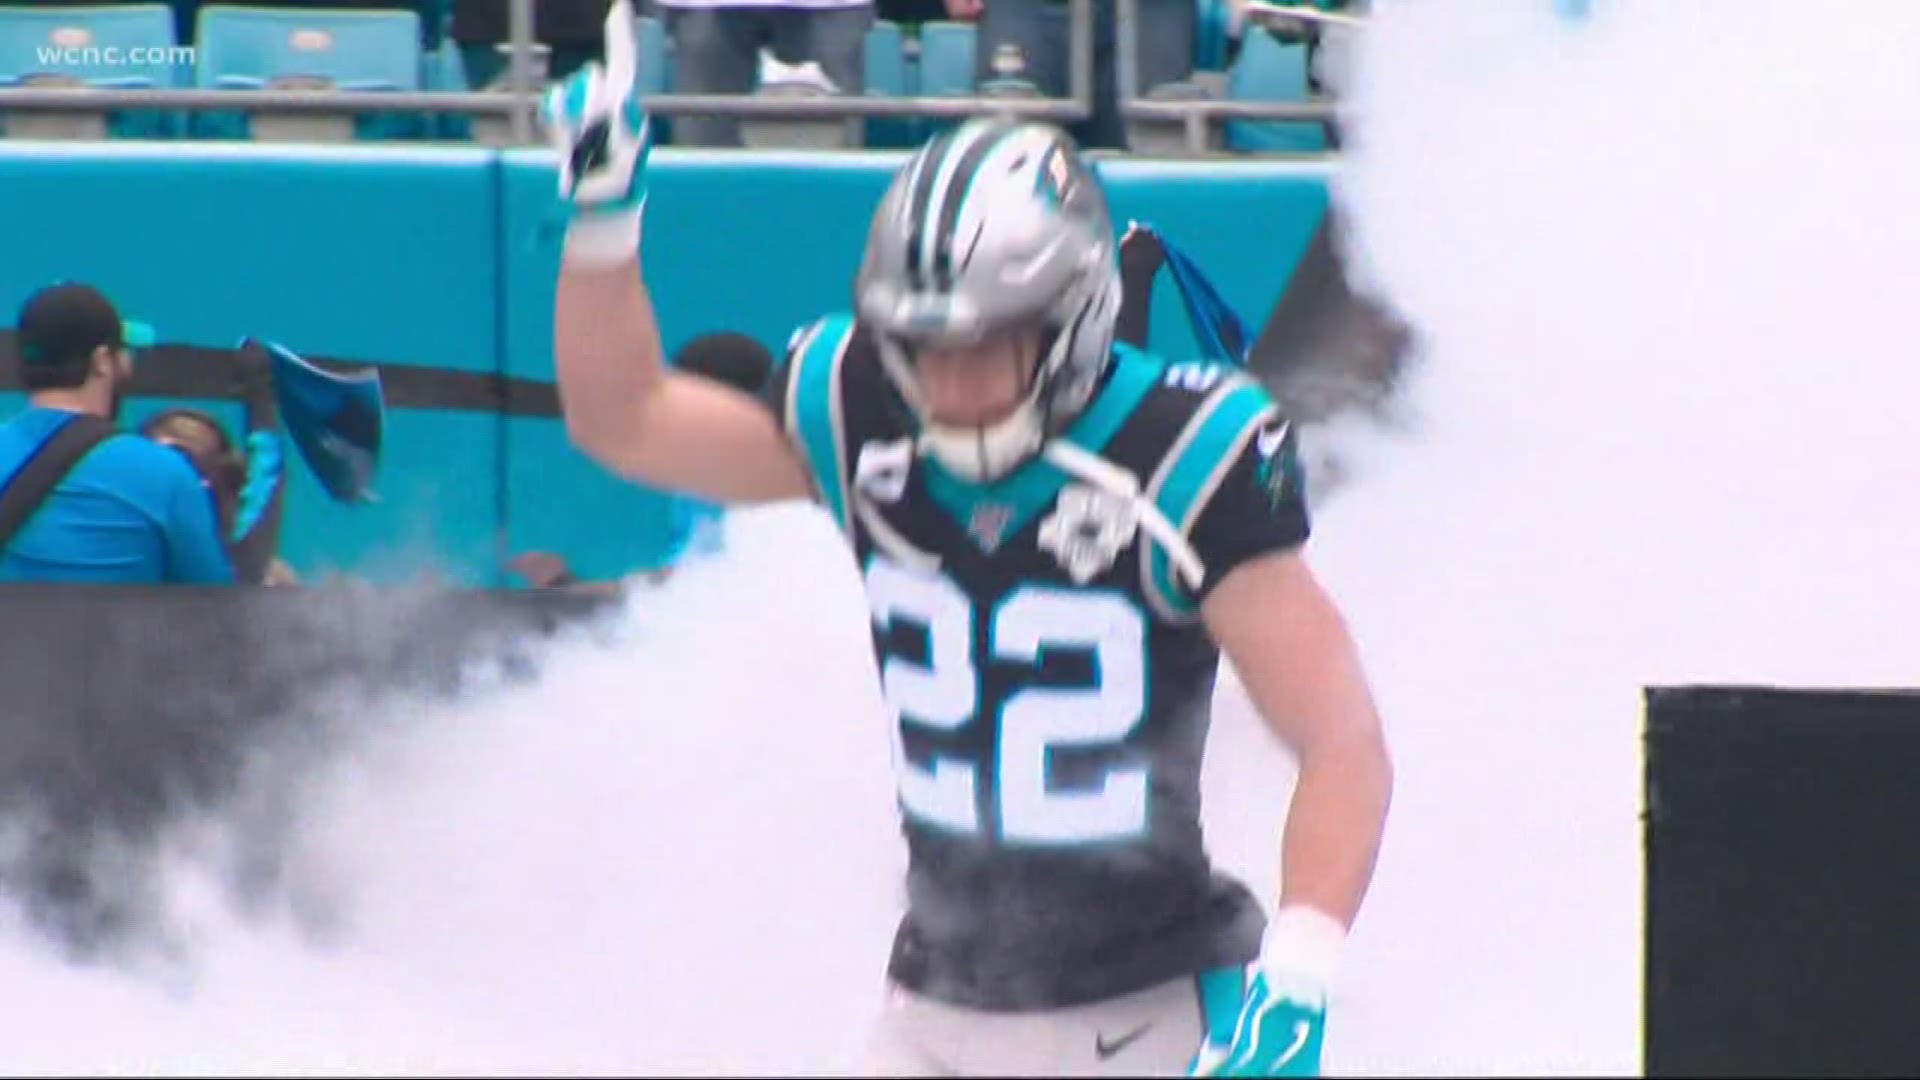 The extension has Christian McCaffrey averaging $16 million per year, which makes him the highest-paid running back in NFL history.